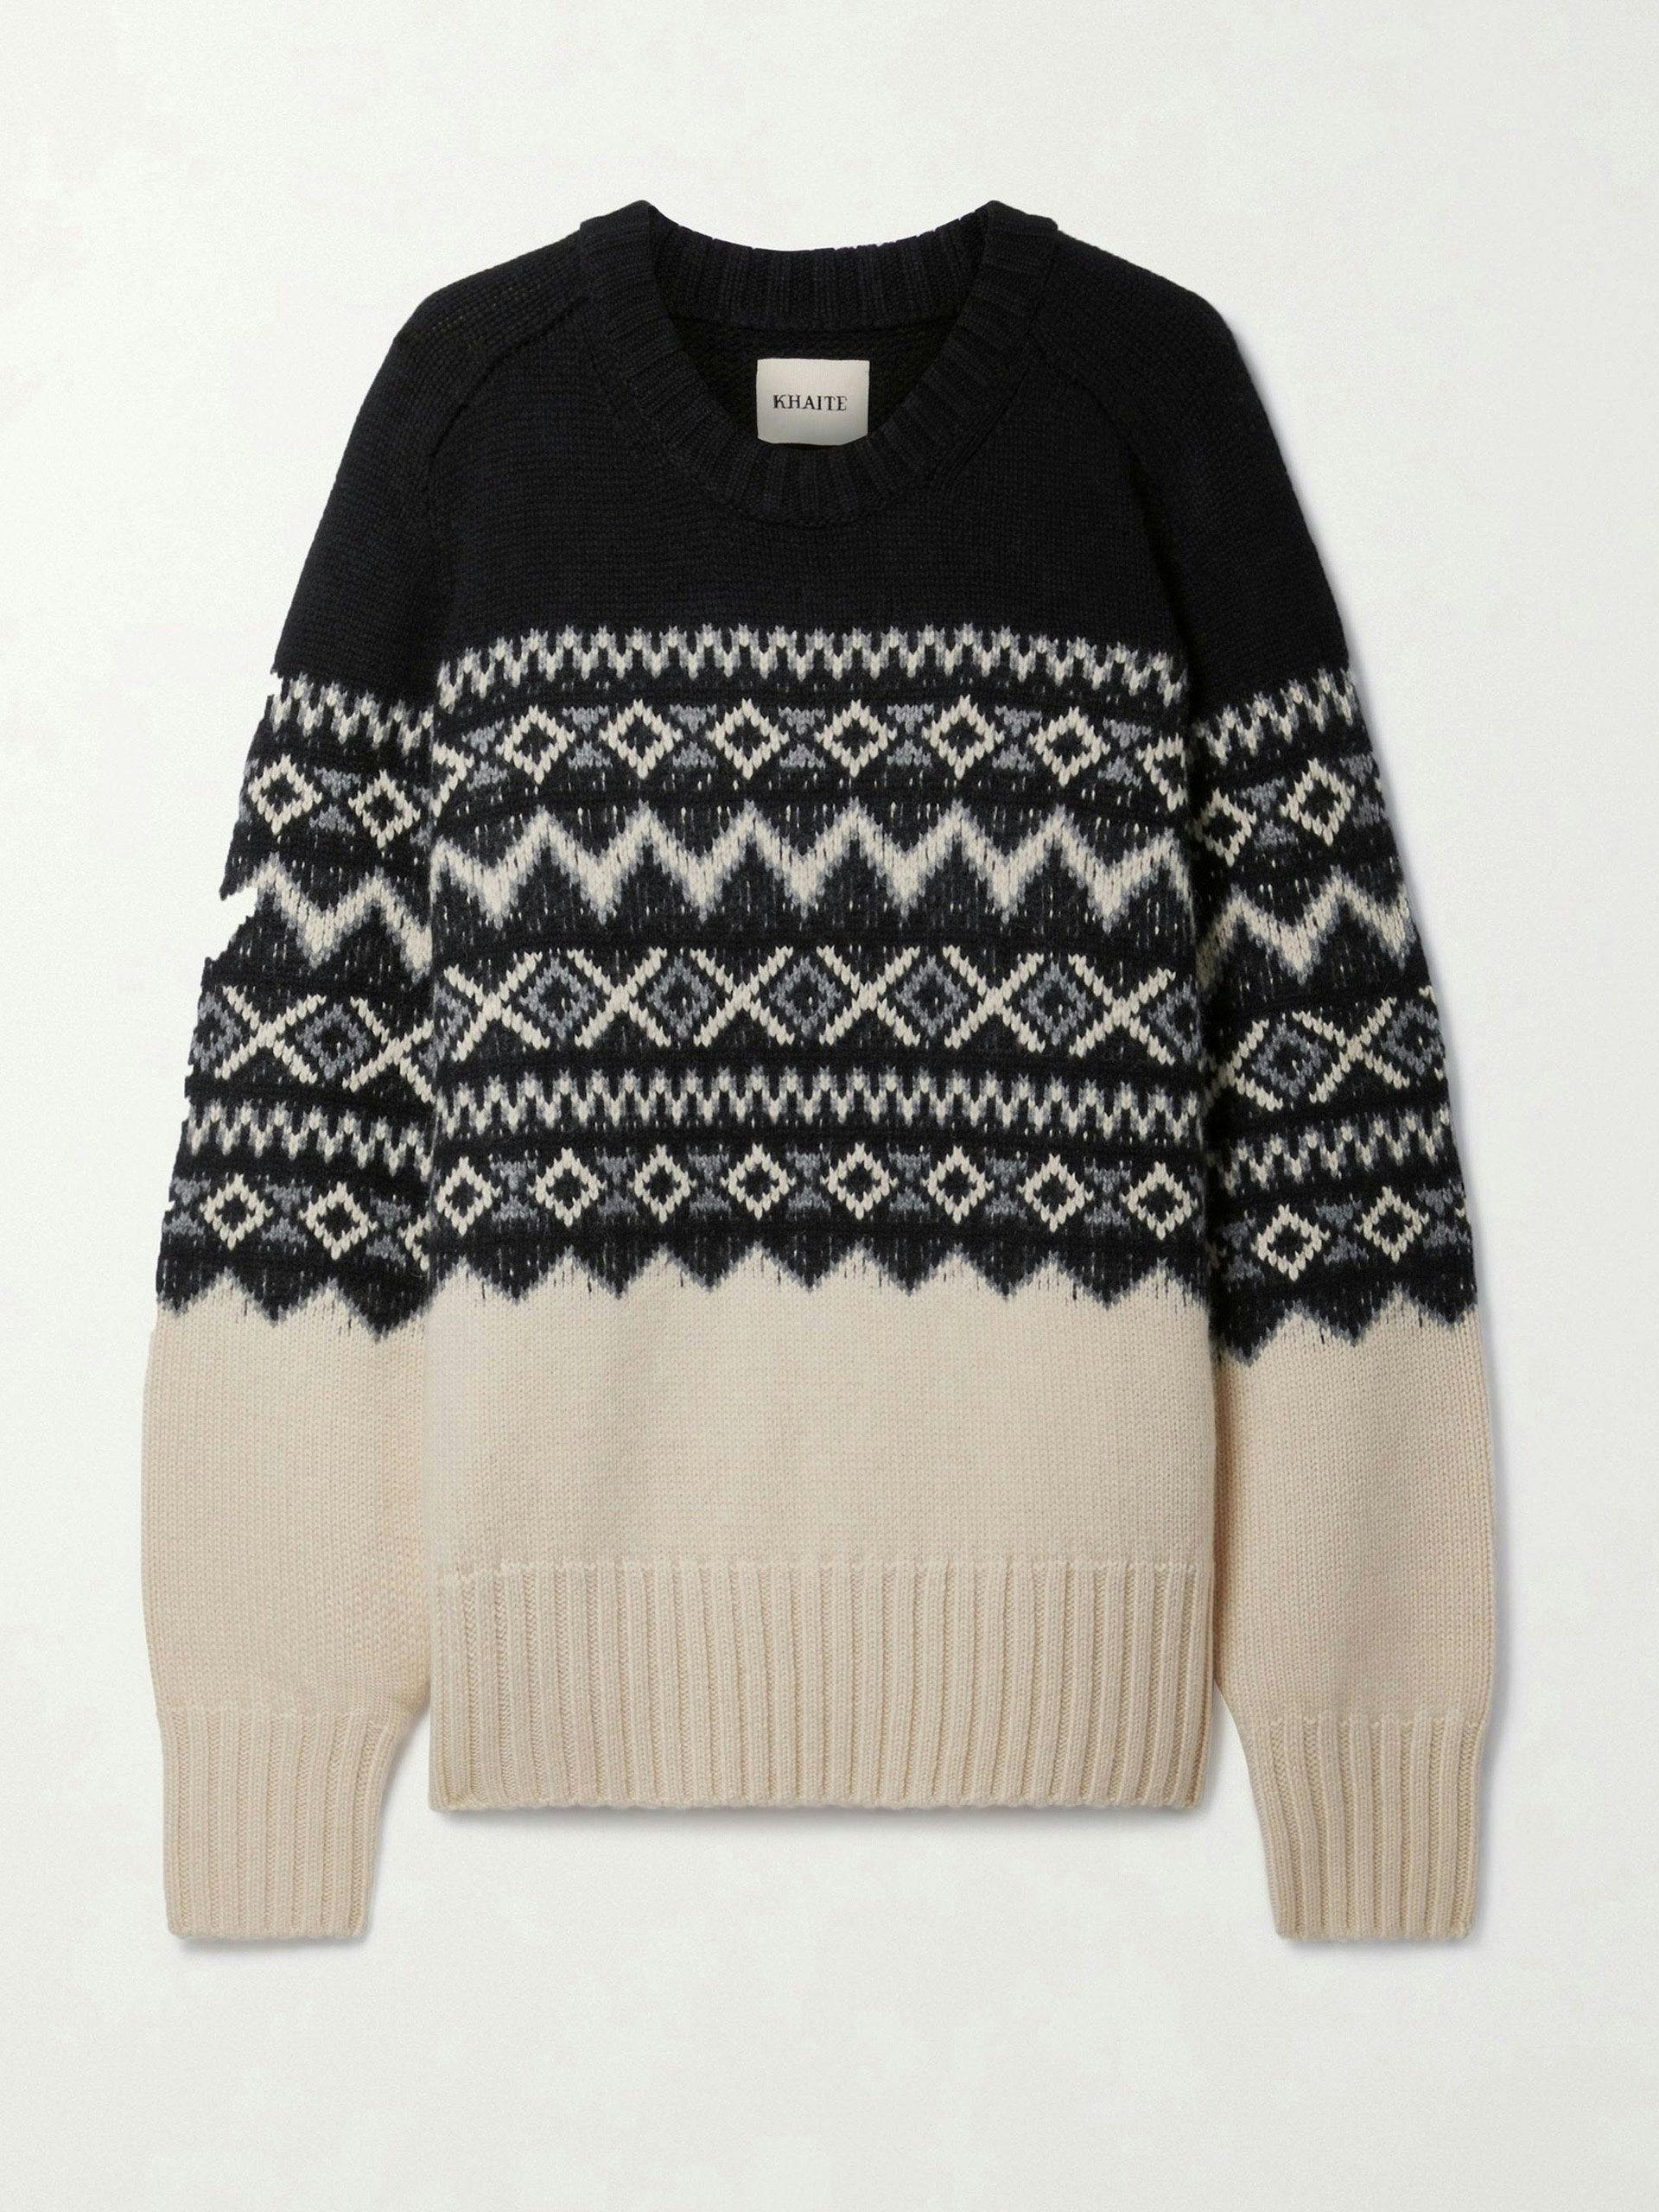 Black and ivory Fair Isle cashmere sweater